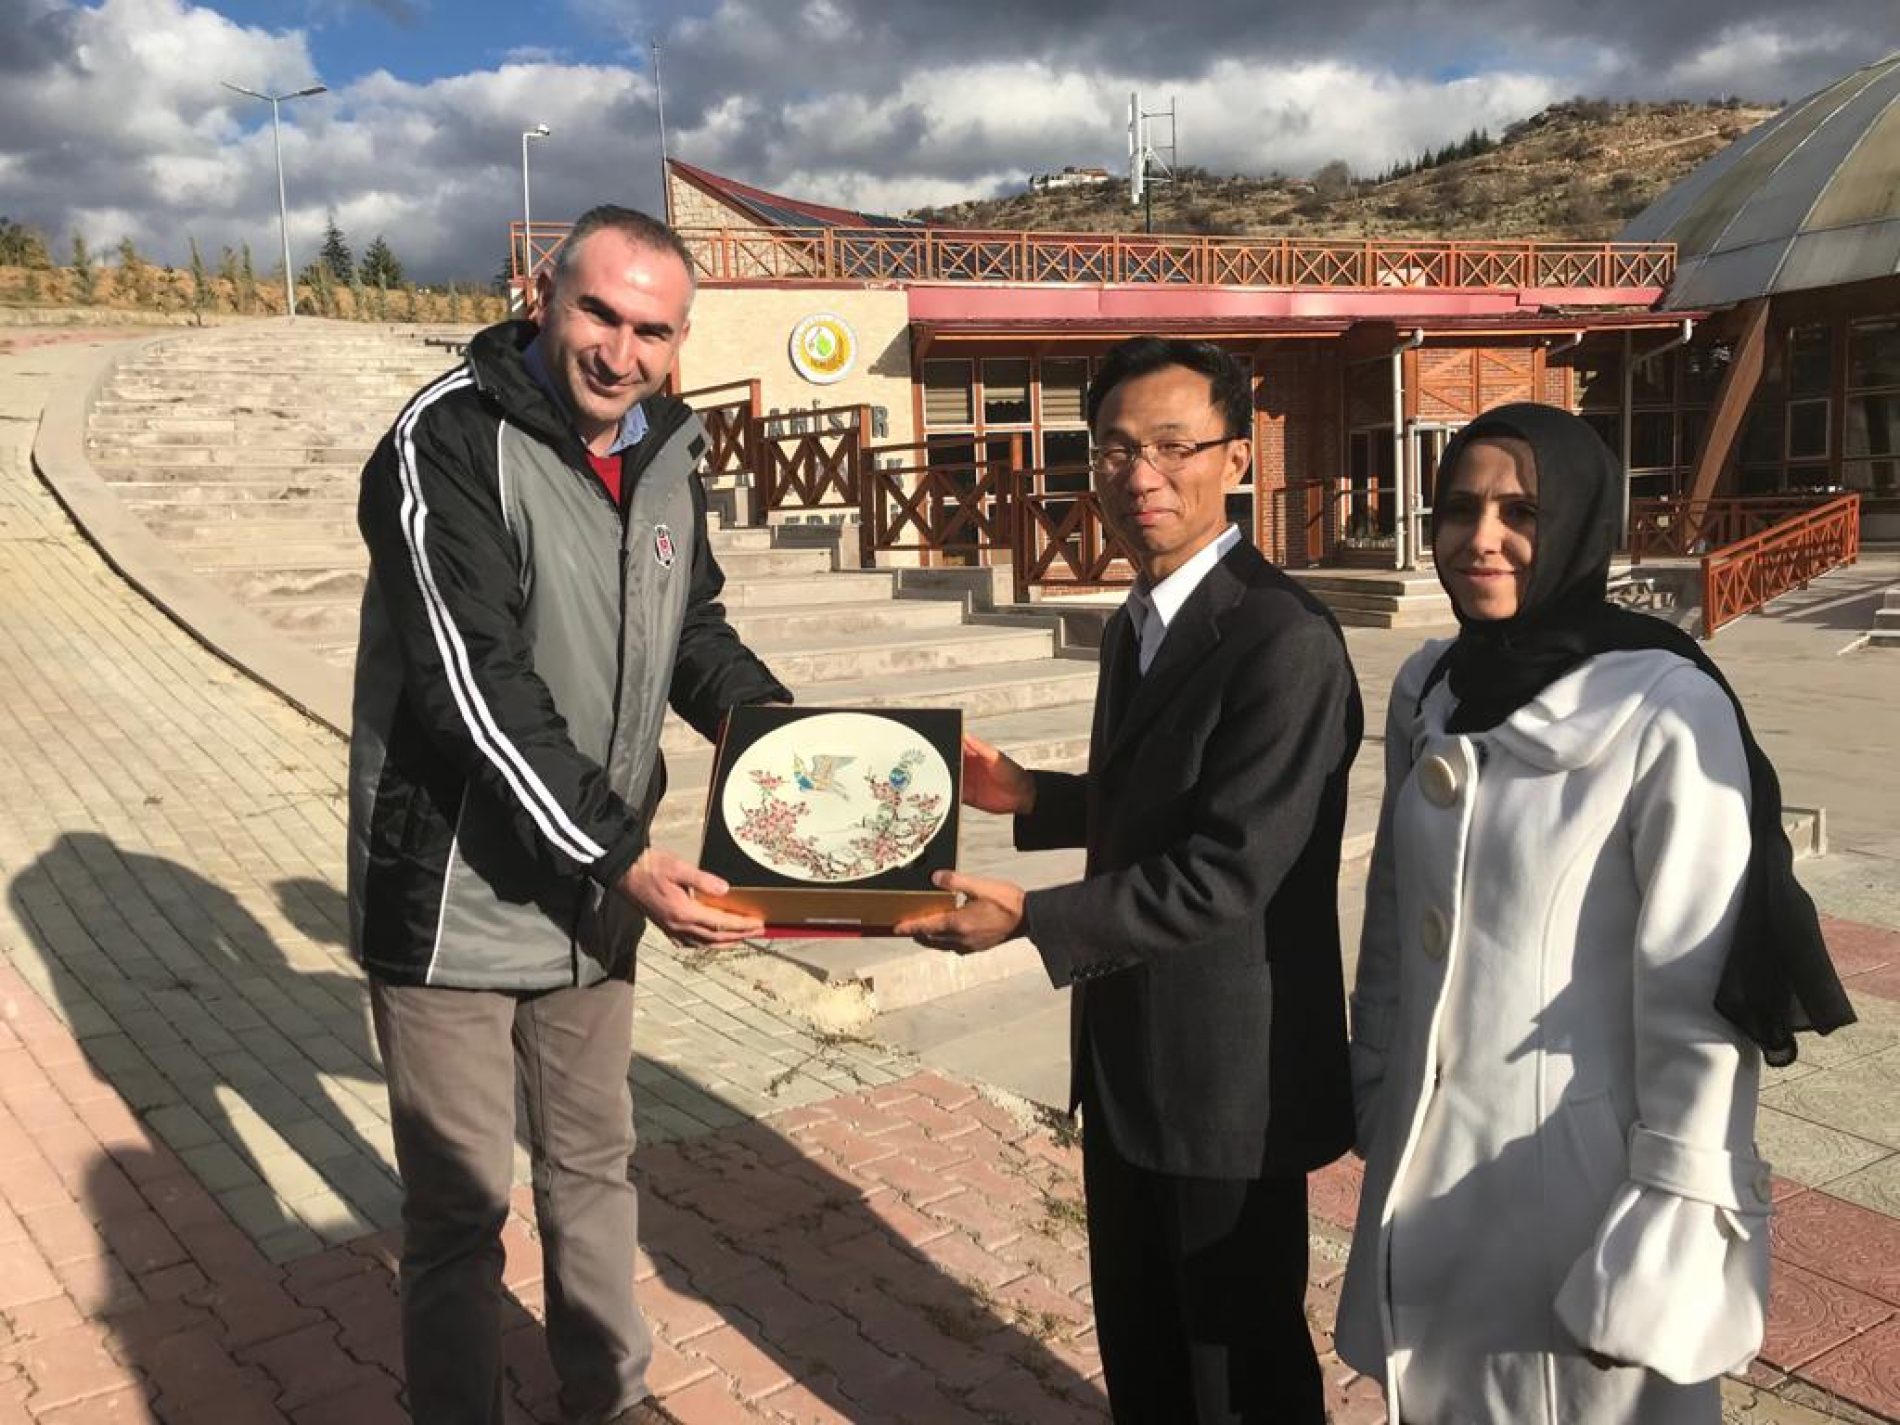 REPRESENTATIVES OF THE PEOPLE’S REPUBLIC OF CHINA VISITED AFYON FRIG VALLEY